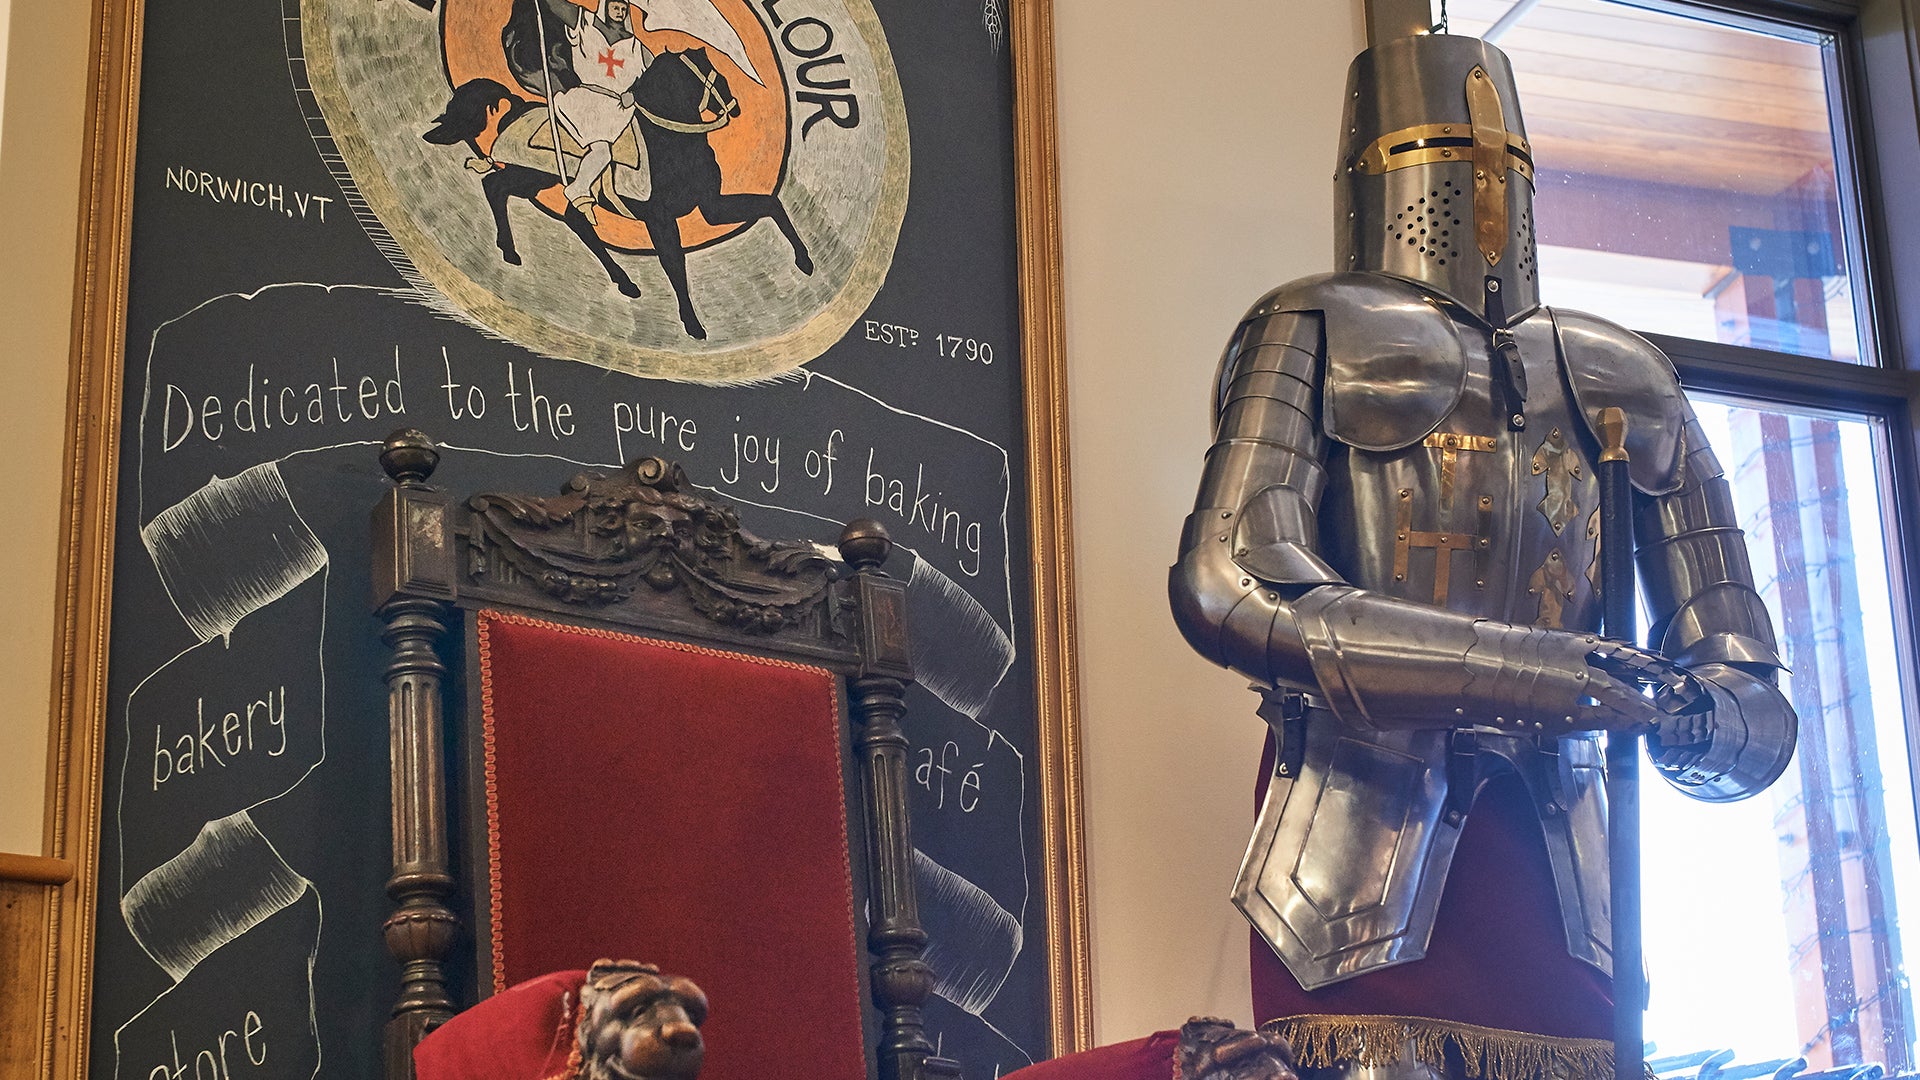 A throne and suit of armor from the King Arthur Flour cafe